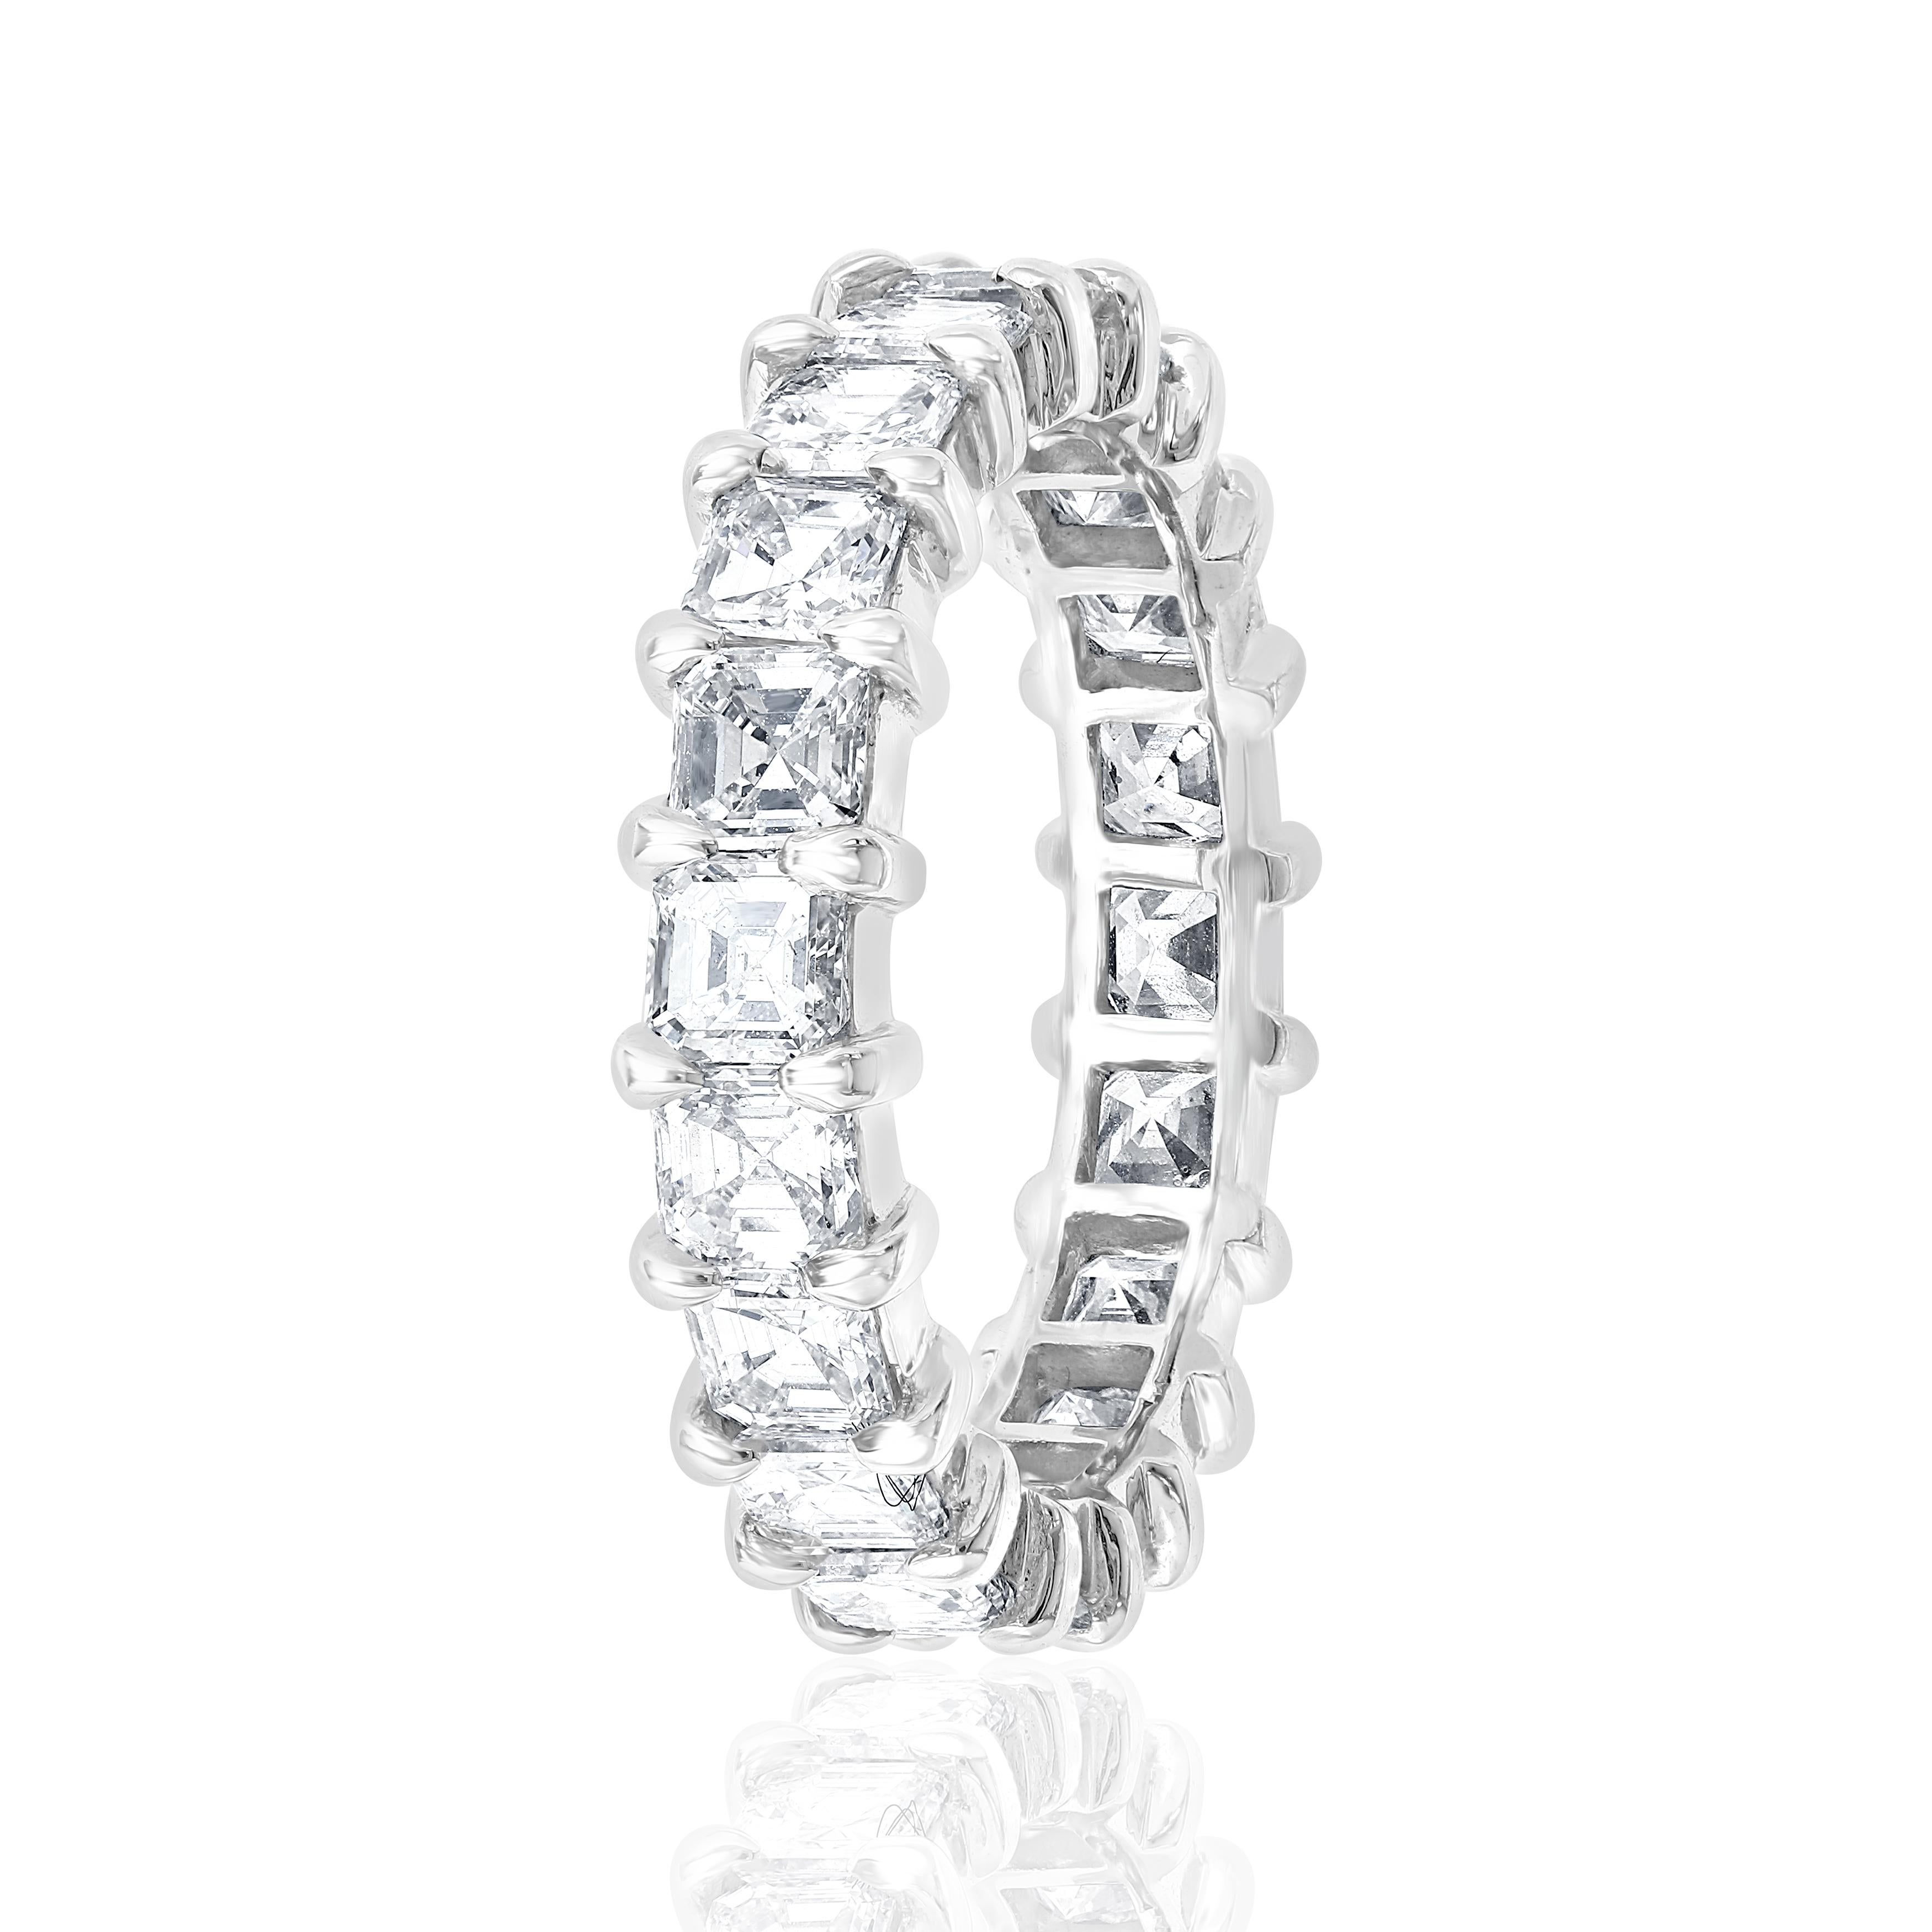 This Beautiful Eternity Band is set with 20 perfectly matched Asscher Cut Diamonds, each weighing over 0.15ct for a total of 3.09Carats. Each stone is of F-G color and VVS-VS clarity. Made in New York City using 18 Karat White Gold. Fits US Size